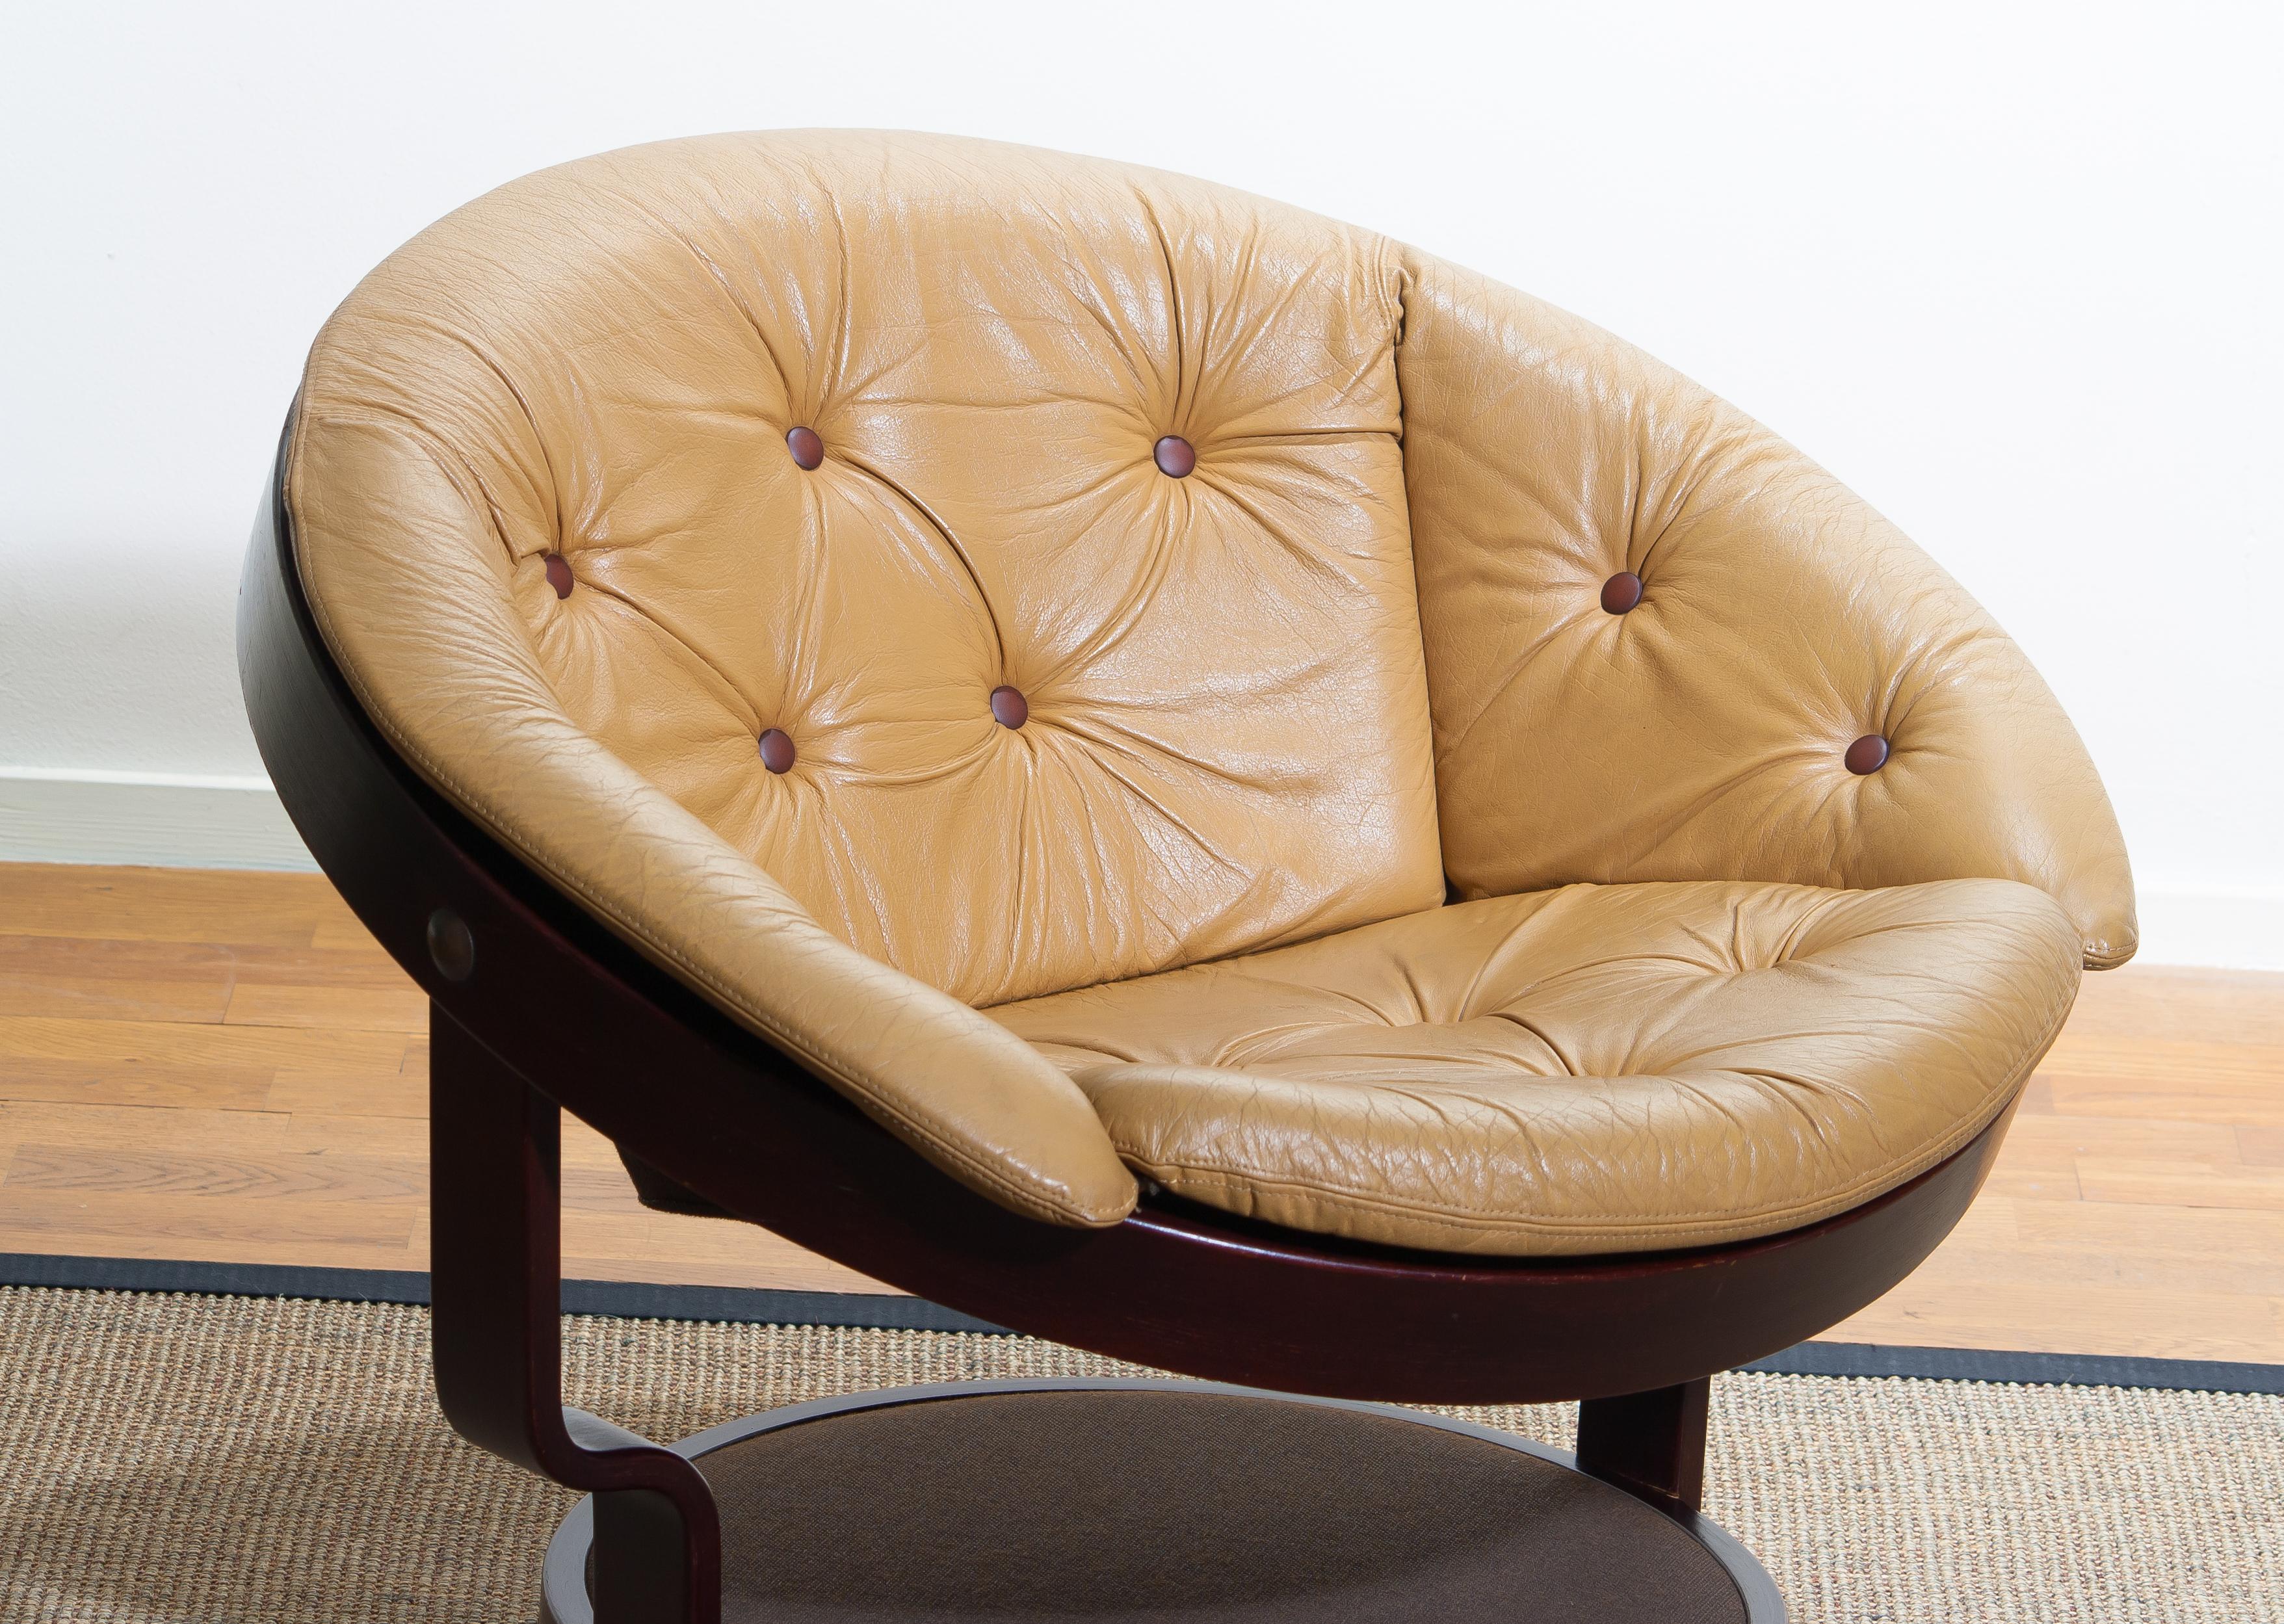 1970s Scandinavian Circle Shaped Swivel Chair by Oddmund Vad in Camel Leather 3